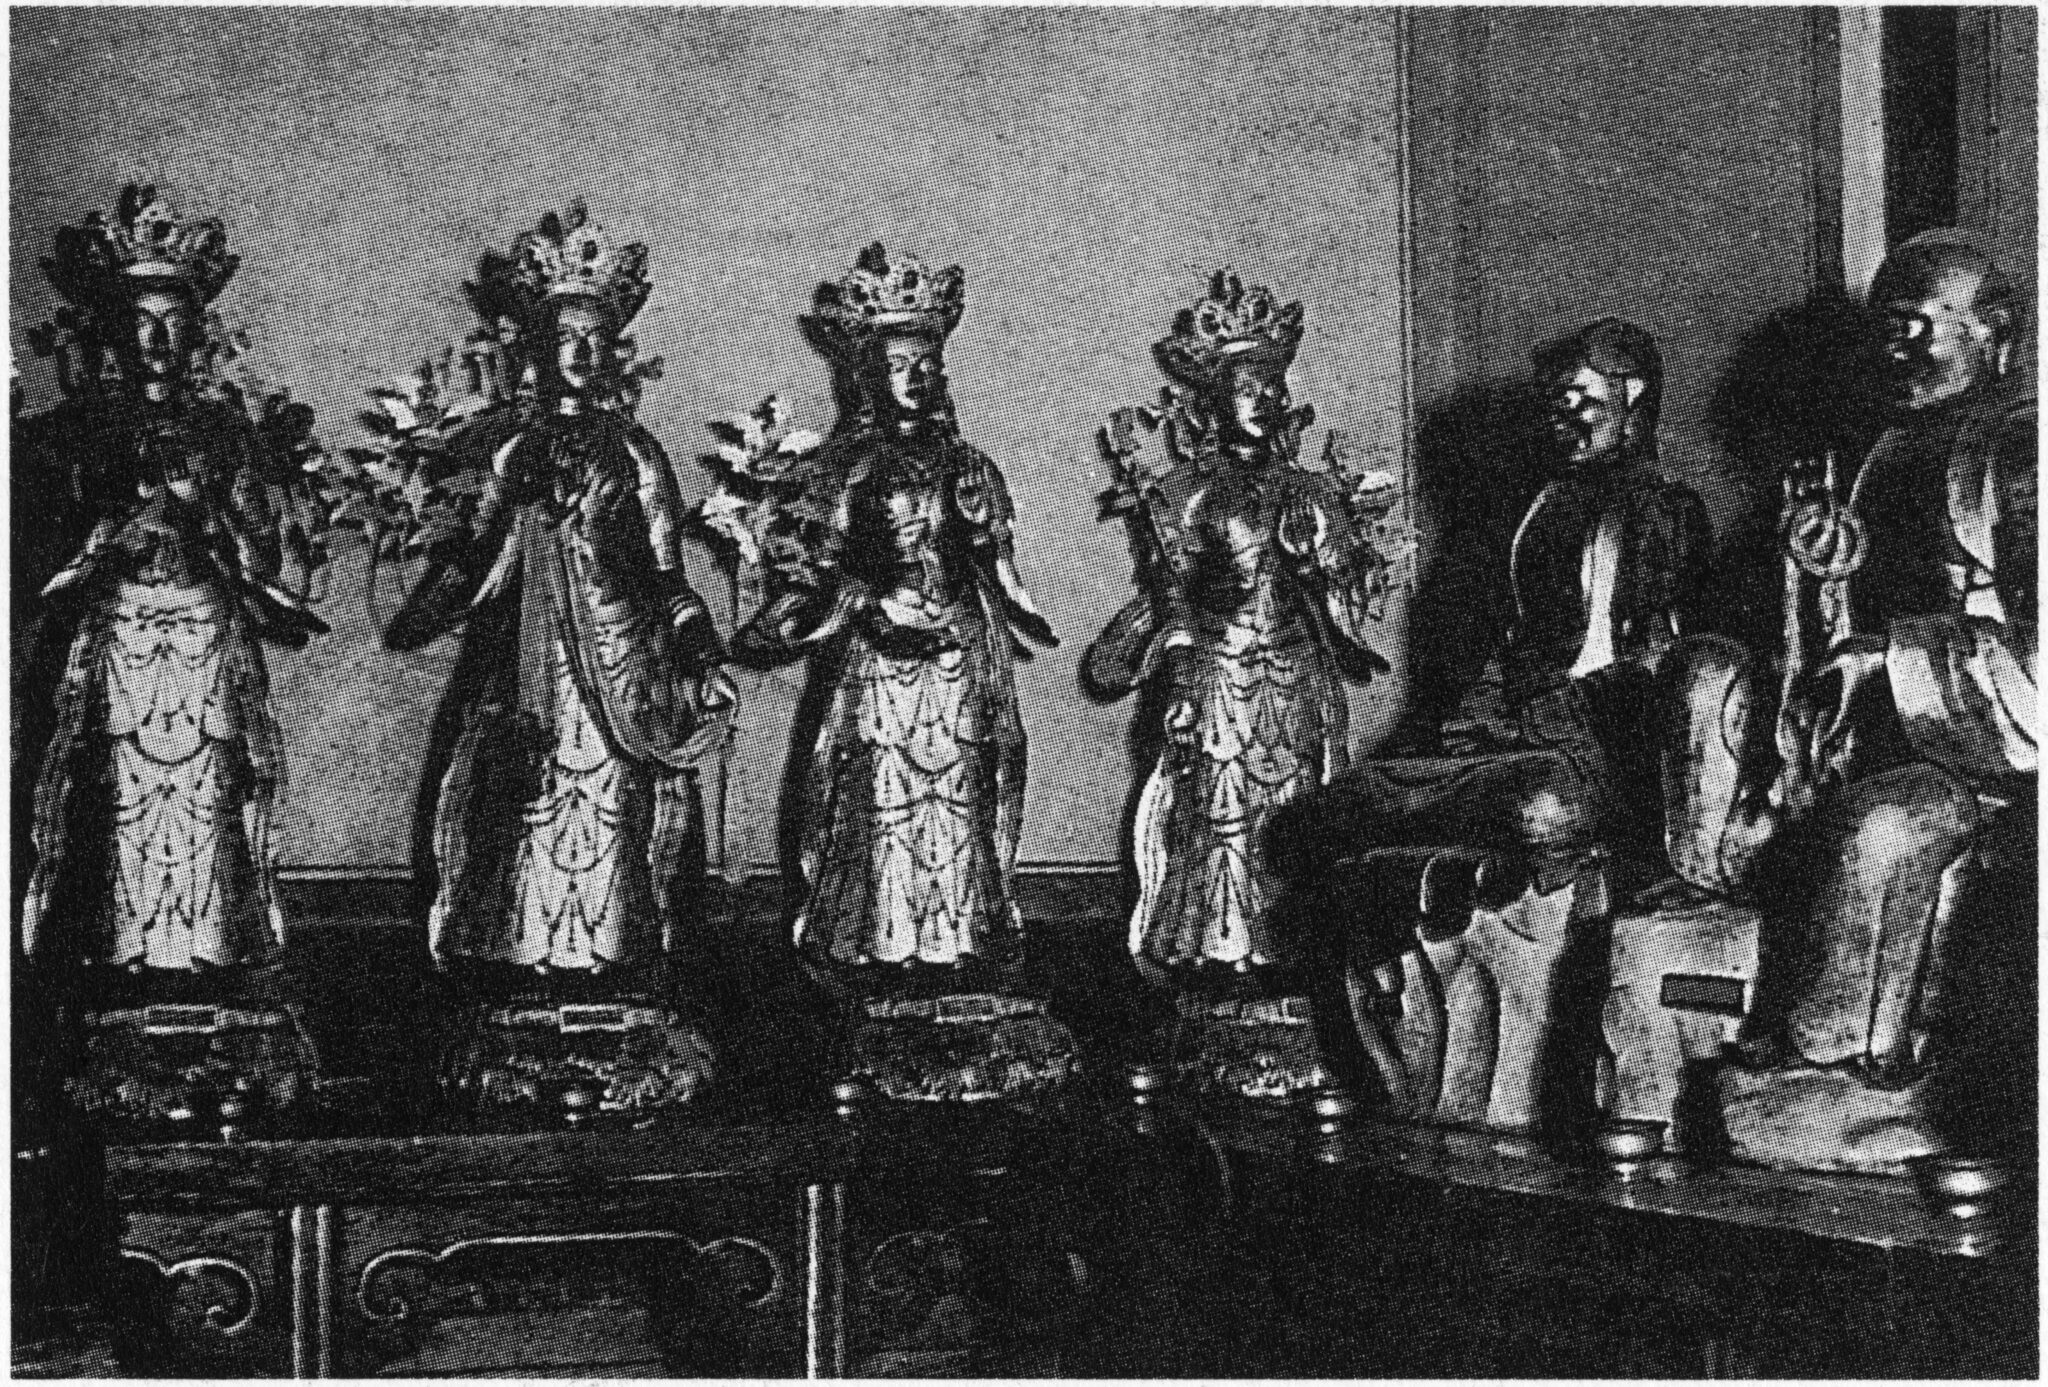 Black and white photograph of six statues, four standing and crowned, two seated, arranged on table